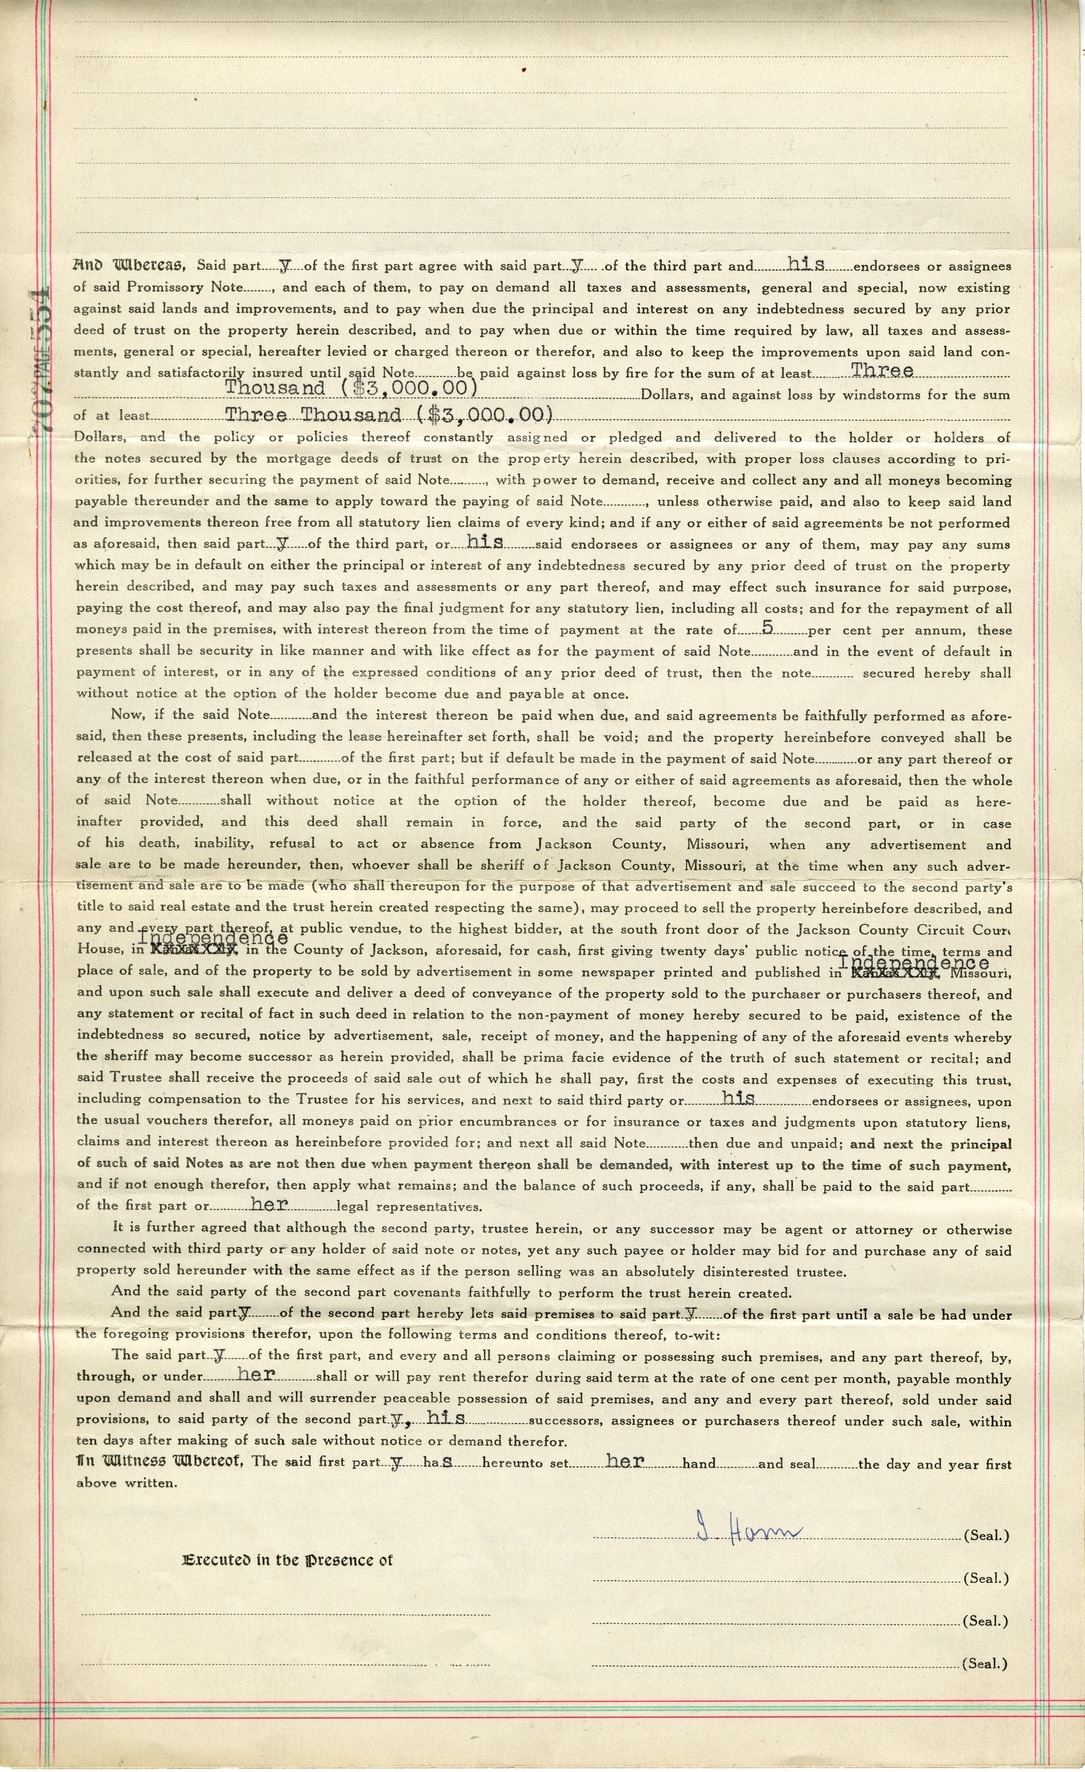 Deed of Trust from I. Horn to E. W. Cooper for James H. Wallace